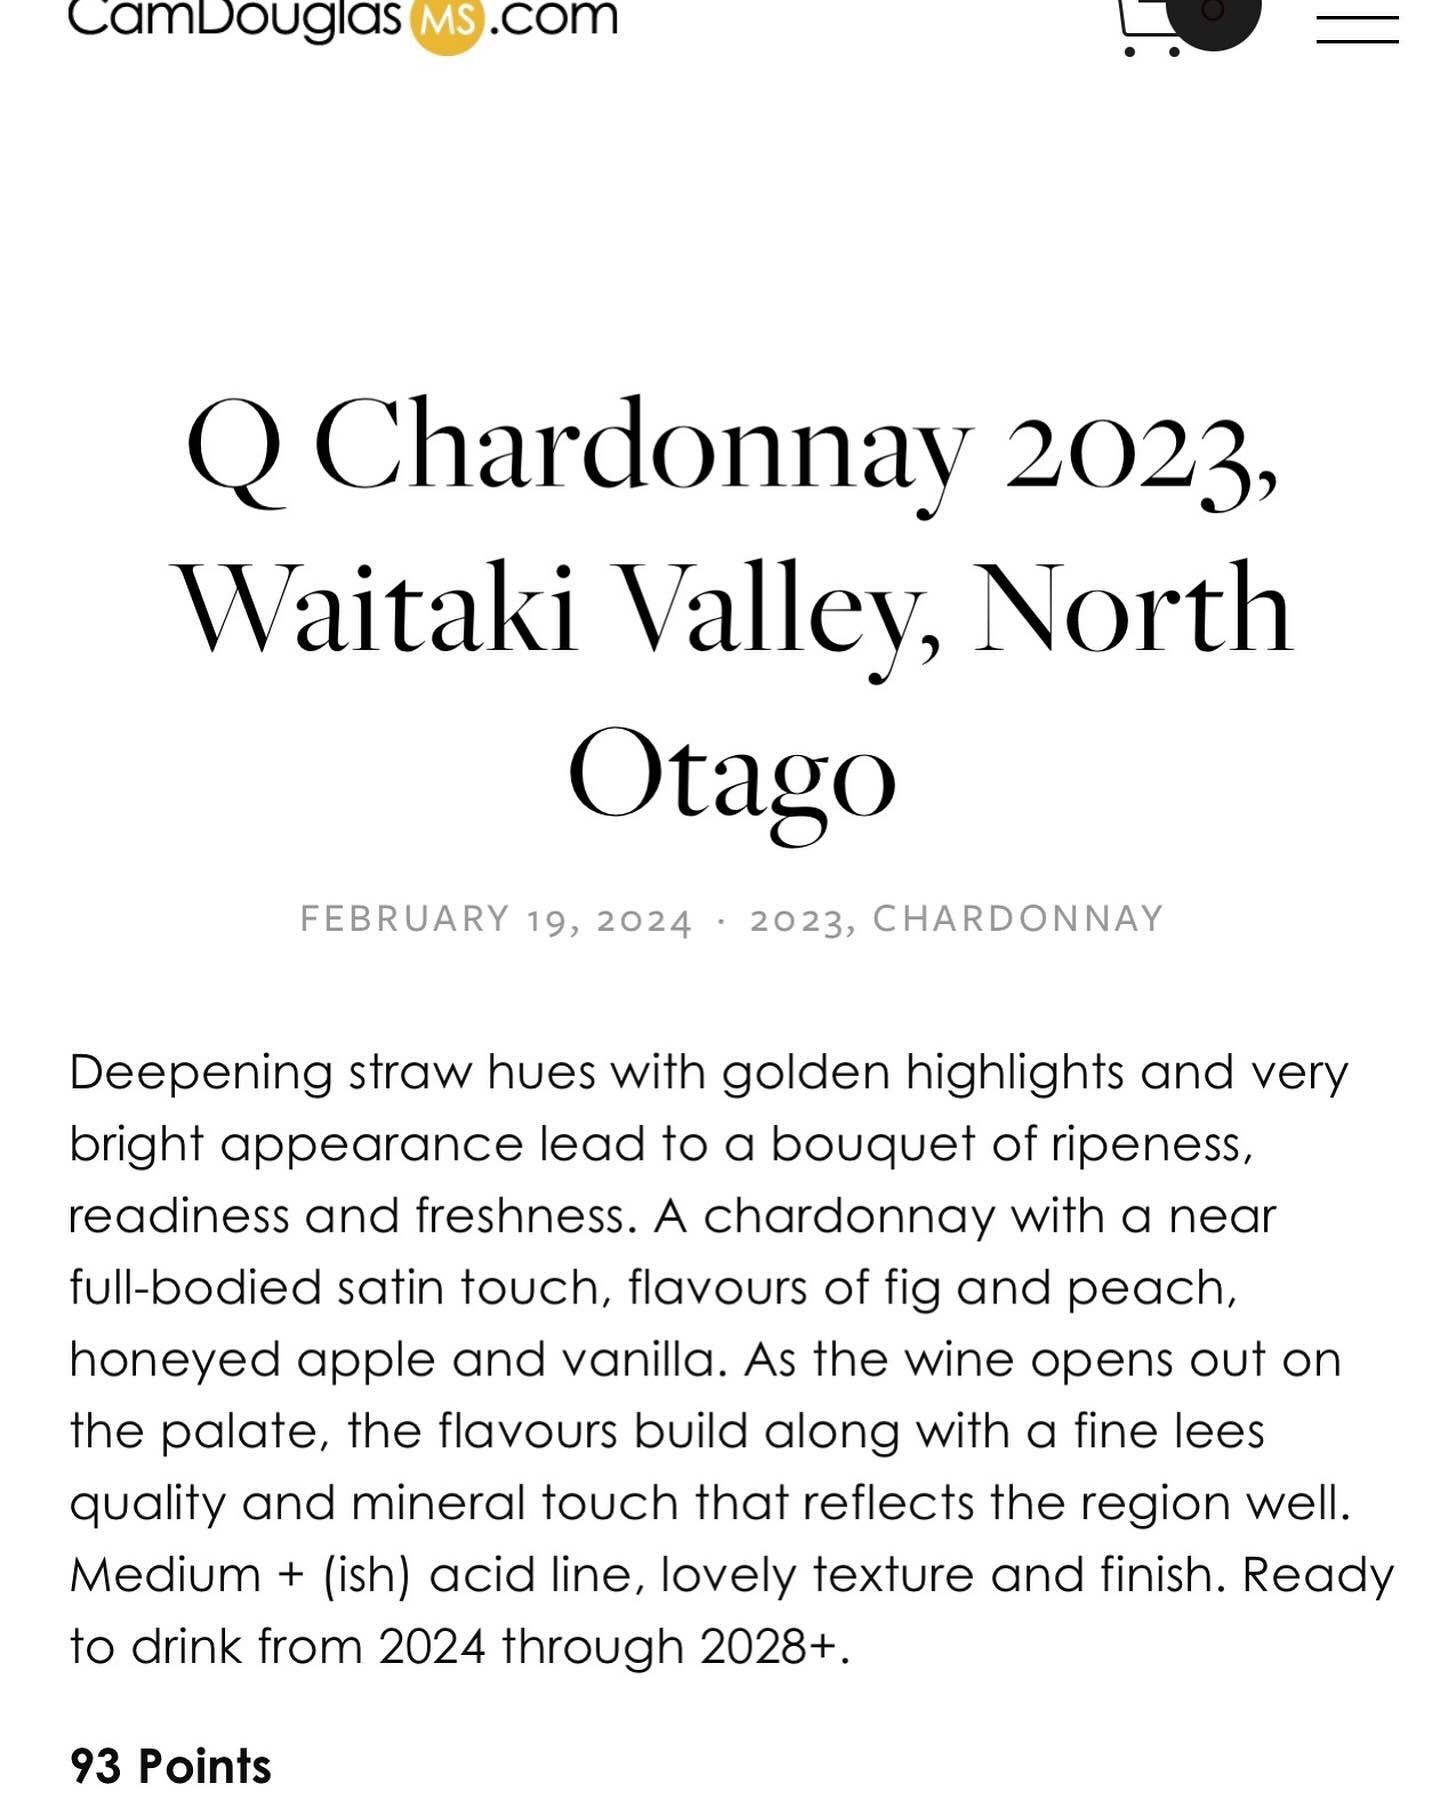 Our latest Q release. 

2023 was an excellent vintage so here&rsquo;s your opportunity to try the 2023 CHARDONNAY 

BUY your wine online, Join QWINE club now by clicking the link in our profile

Our wine comes from Waitaki Valley &ndash; where limest